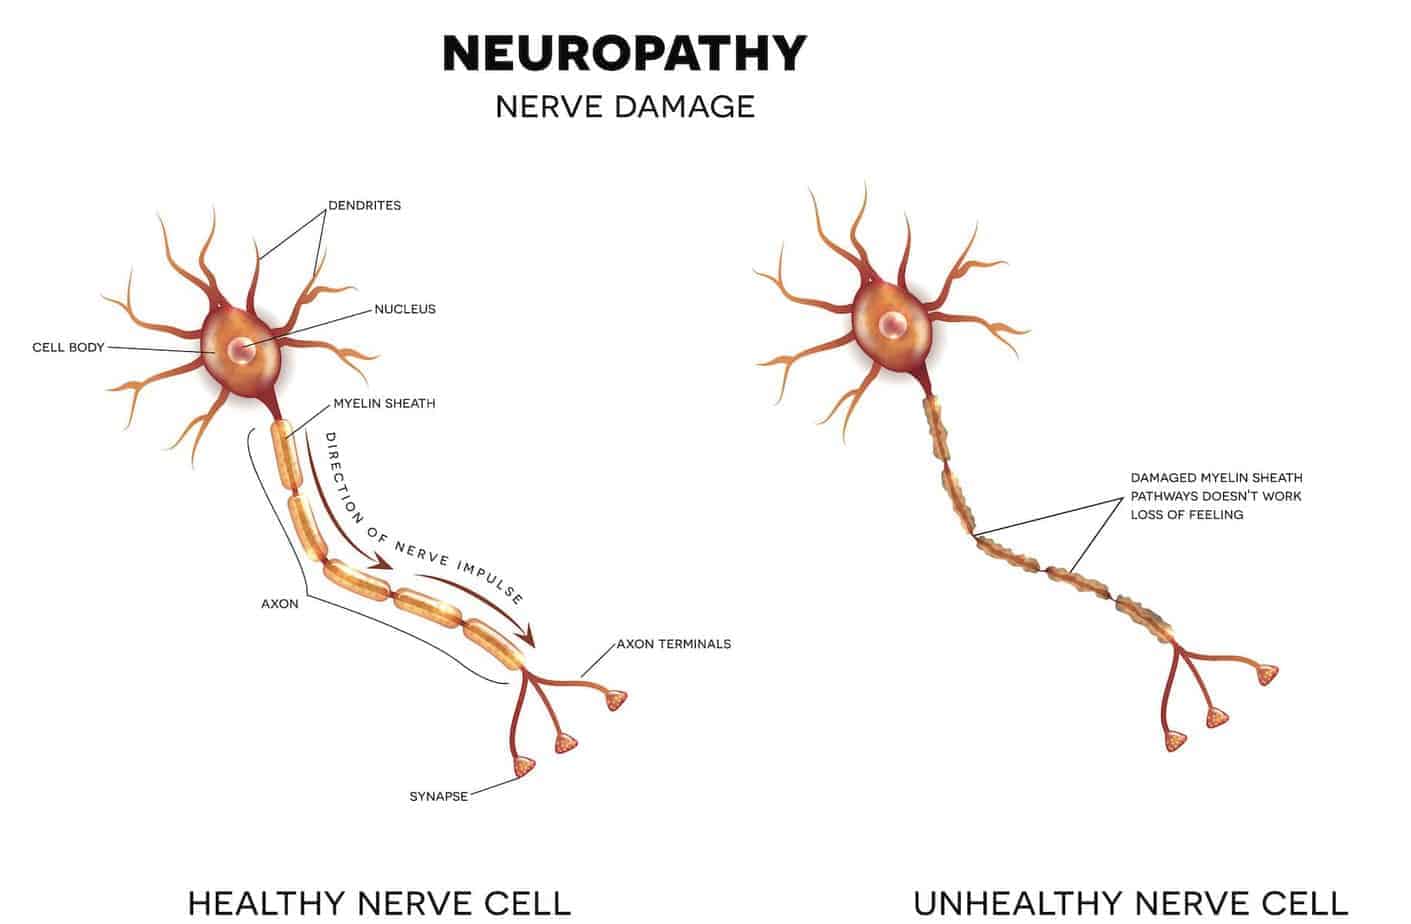 Damaged nerves from diabetic neuropathy